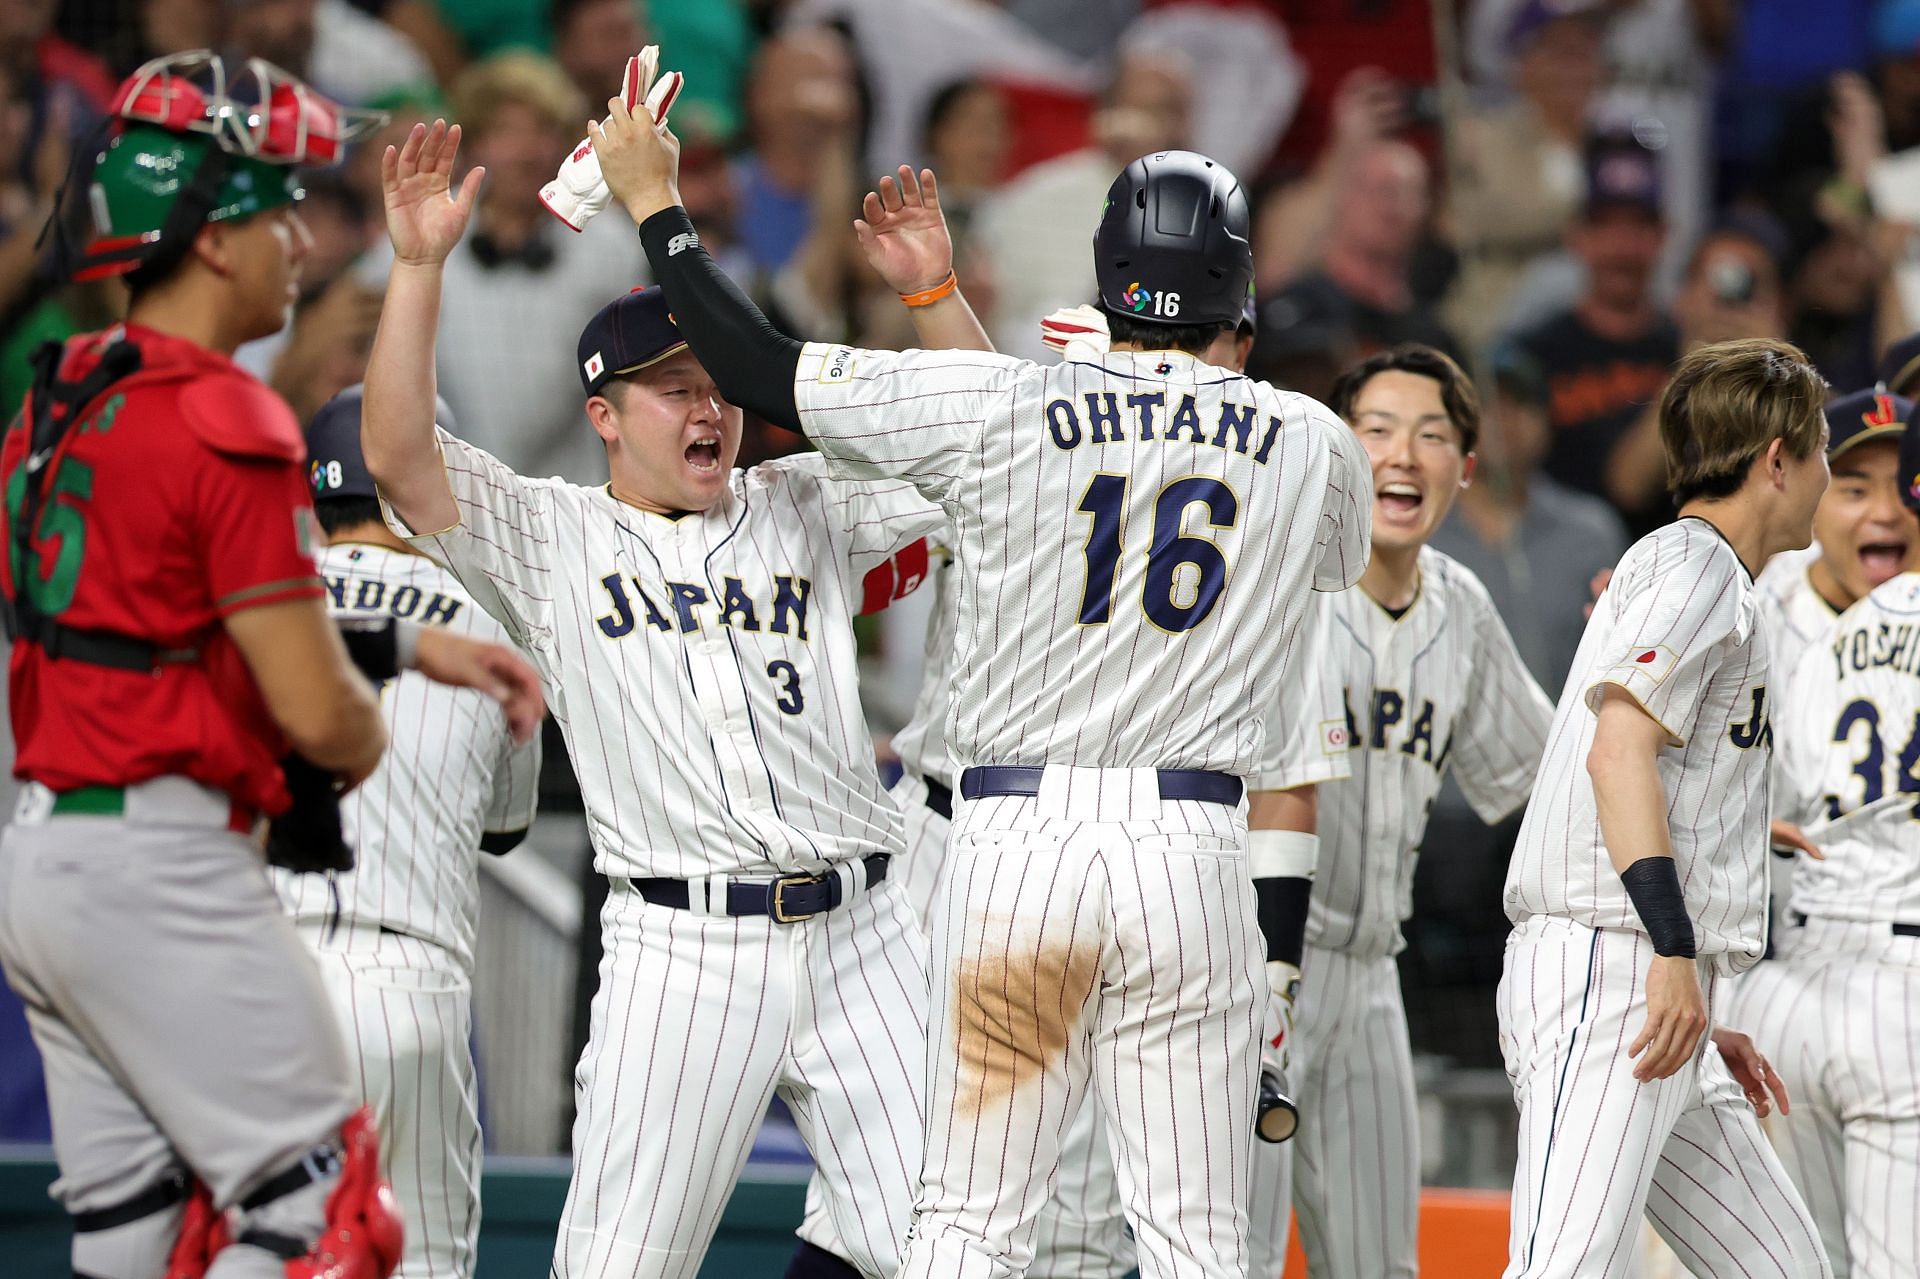 How to watch USA vs. Japan in the World Baseball Classic final